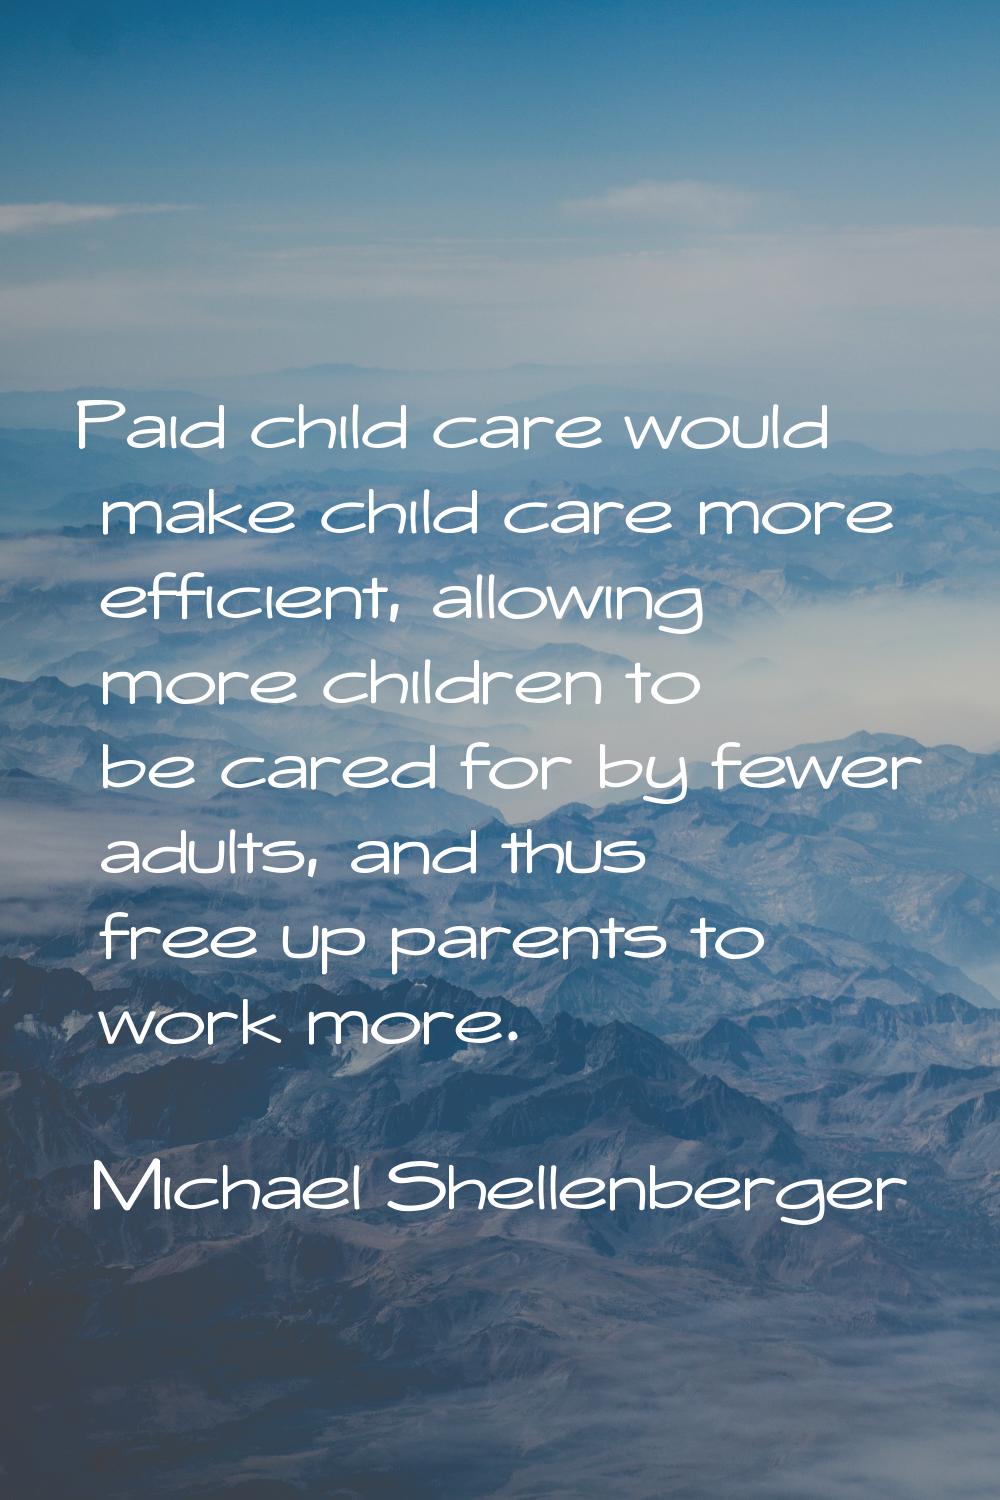 Paid child care would make child care more efficient, allowing more children to be cared for by few